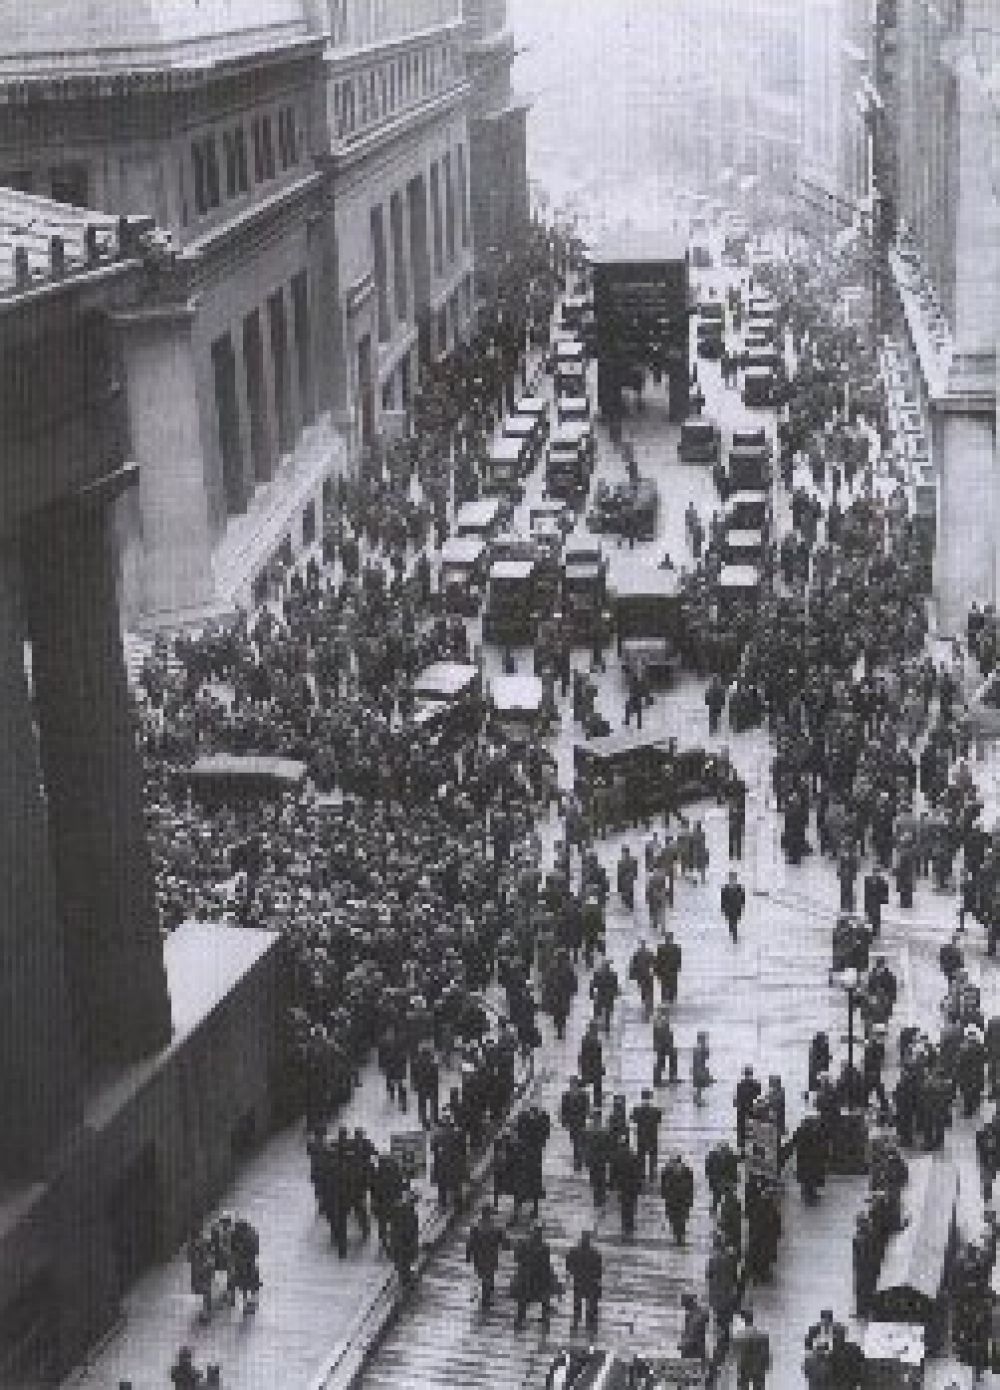 10000 Years Of Economy Stock Market Crash On Wall Street And Start Of The 1930s Crisis 